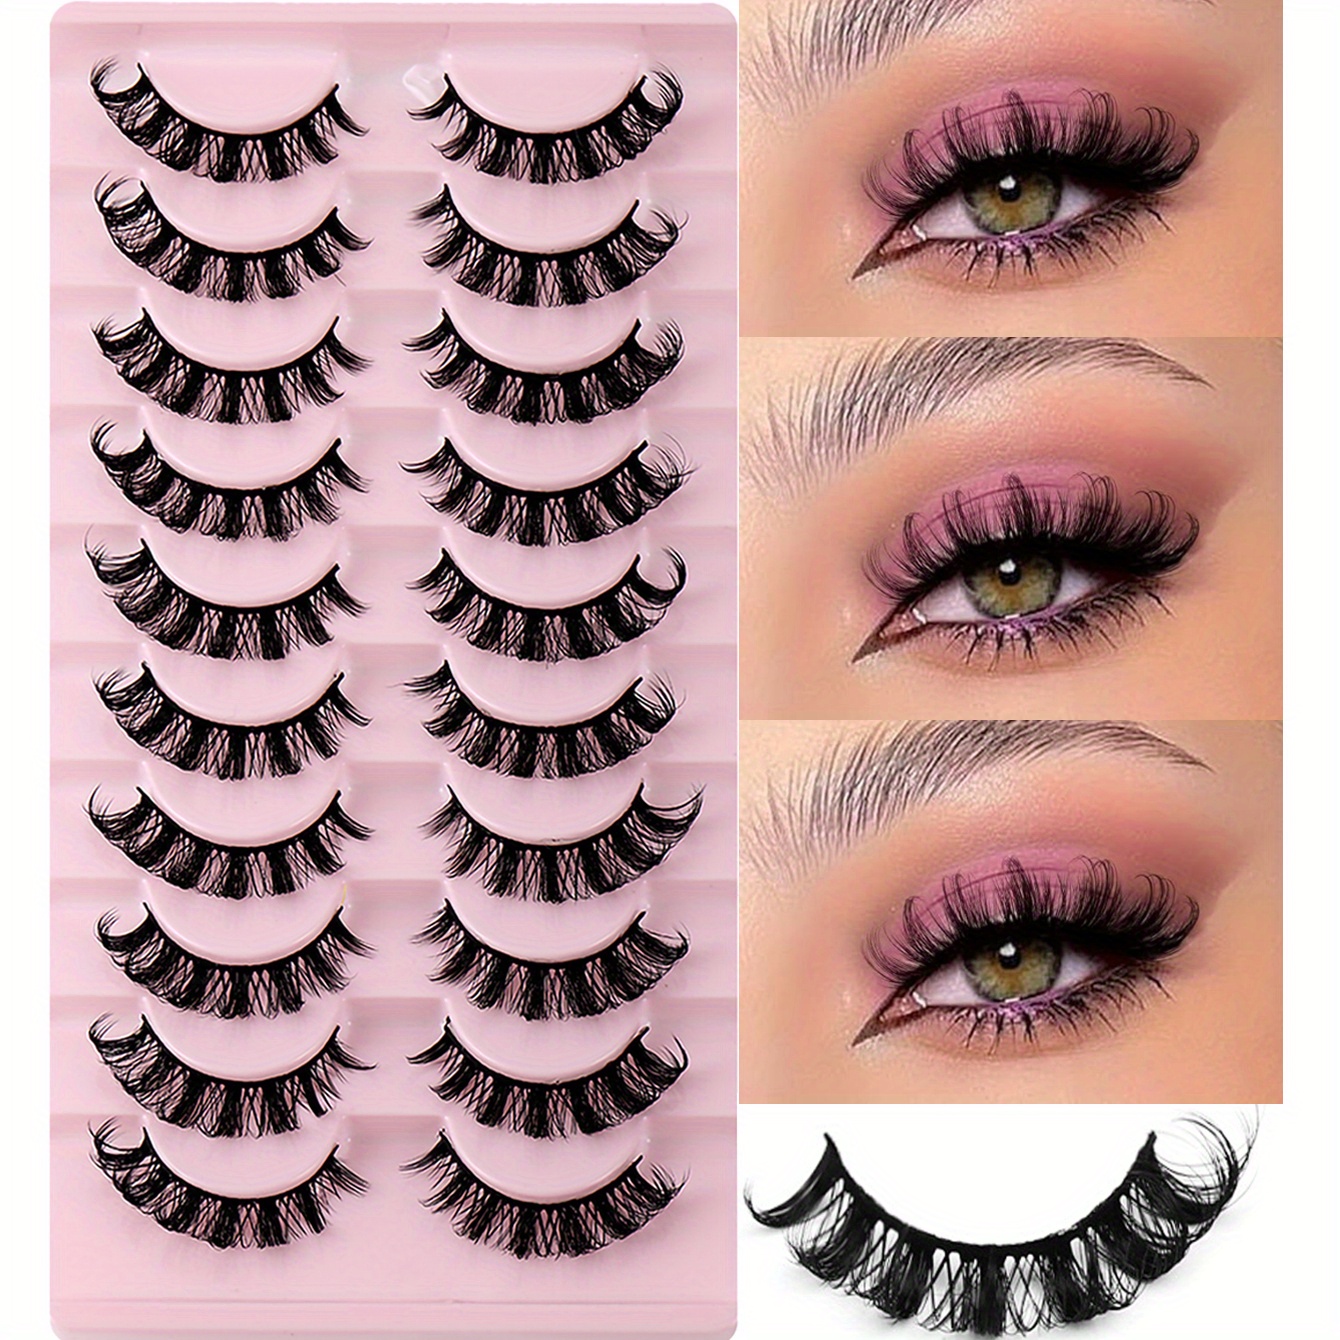 

3boxes (30pairs) Russian Strip Lashes D Fake Lashes Natural Look Fluffy Volume Wispy Russian Lashes 3d Effect Fake Eyelashes